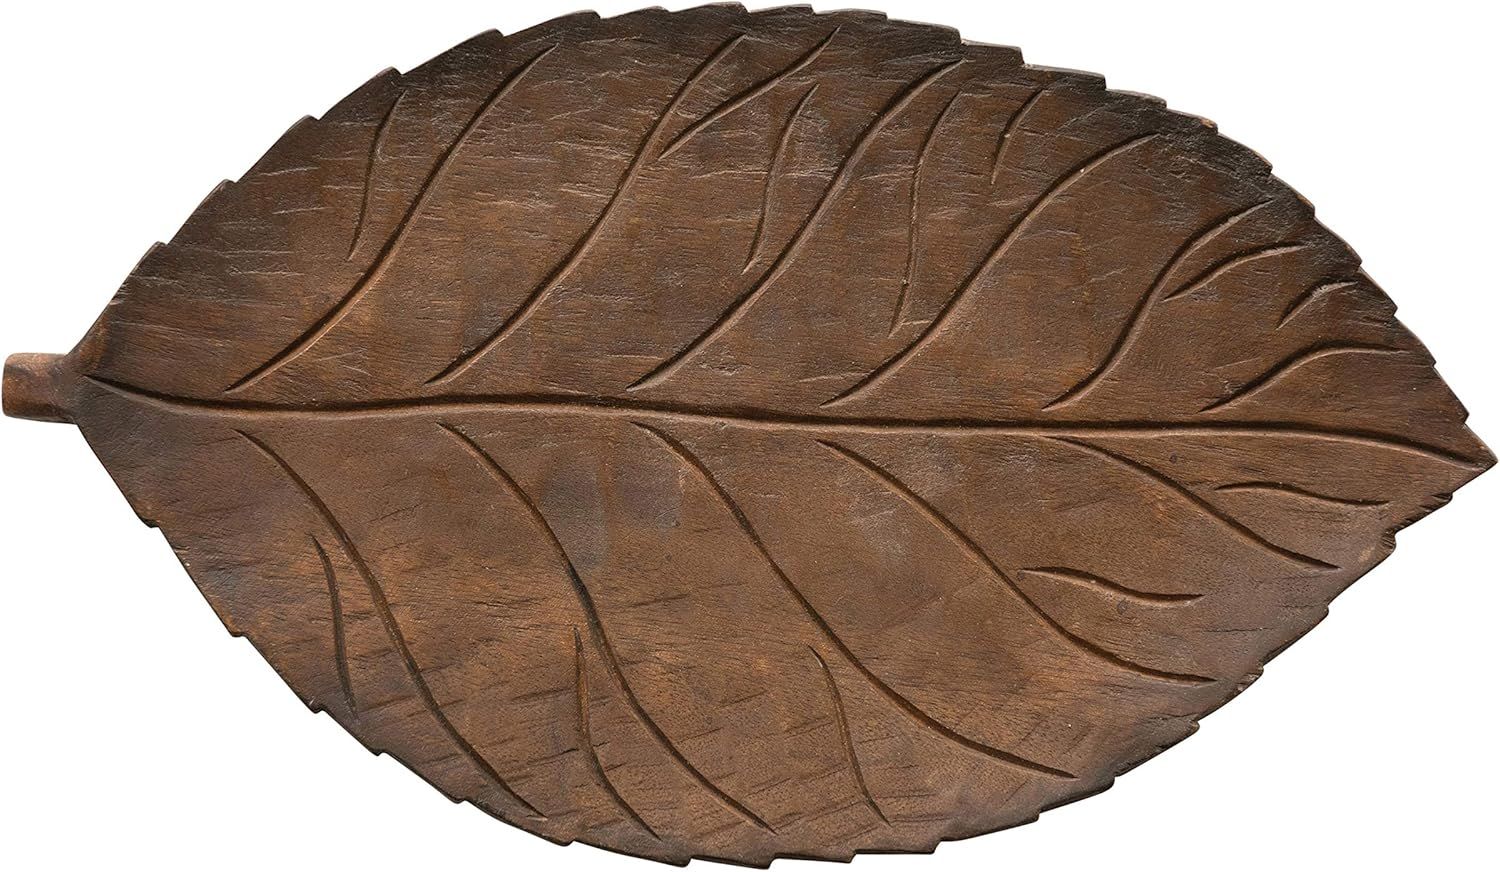 Creative Co-Op Hand-Carved Mango Wood Leaf Tray, Brown | Amazon (US)